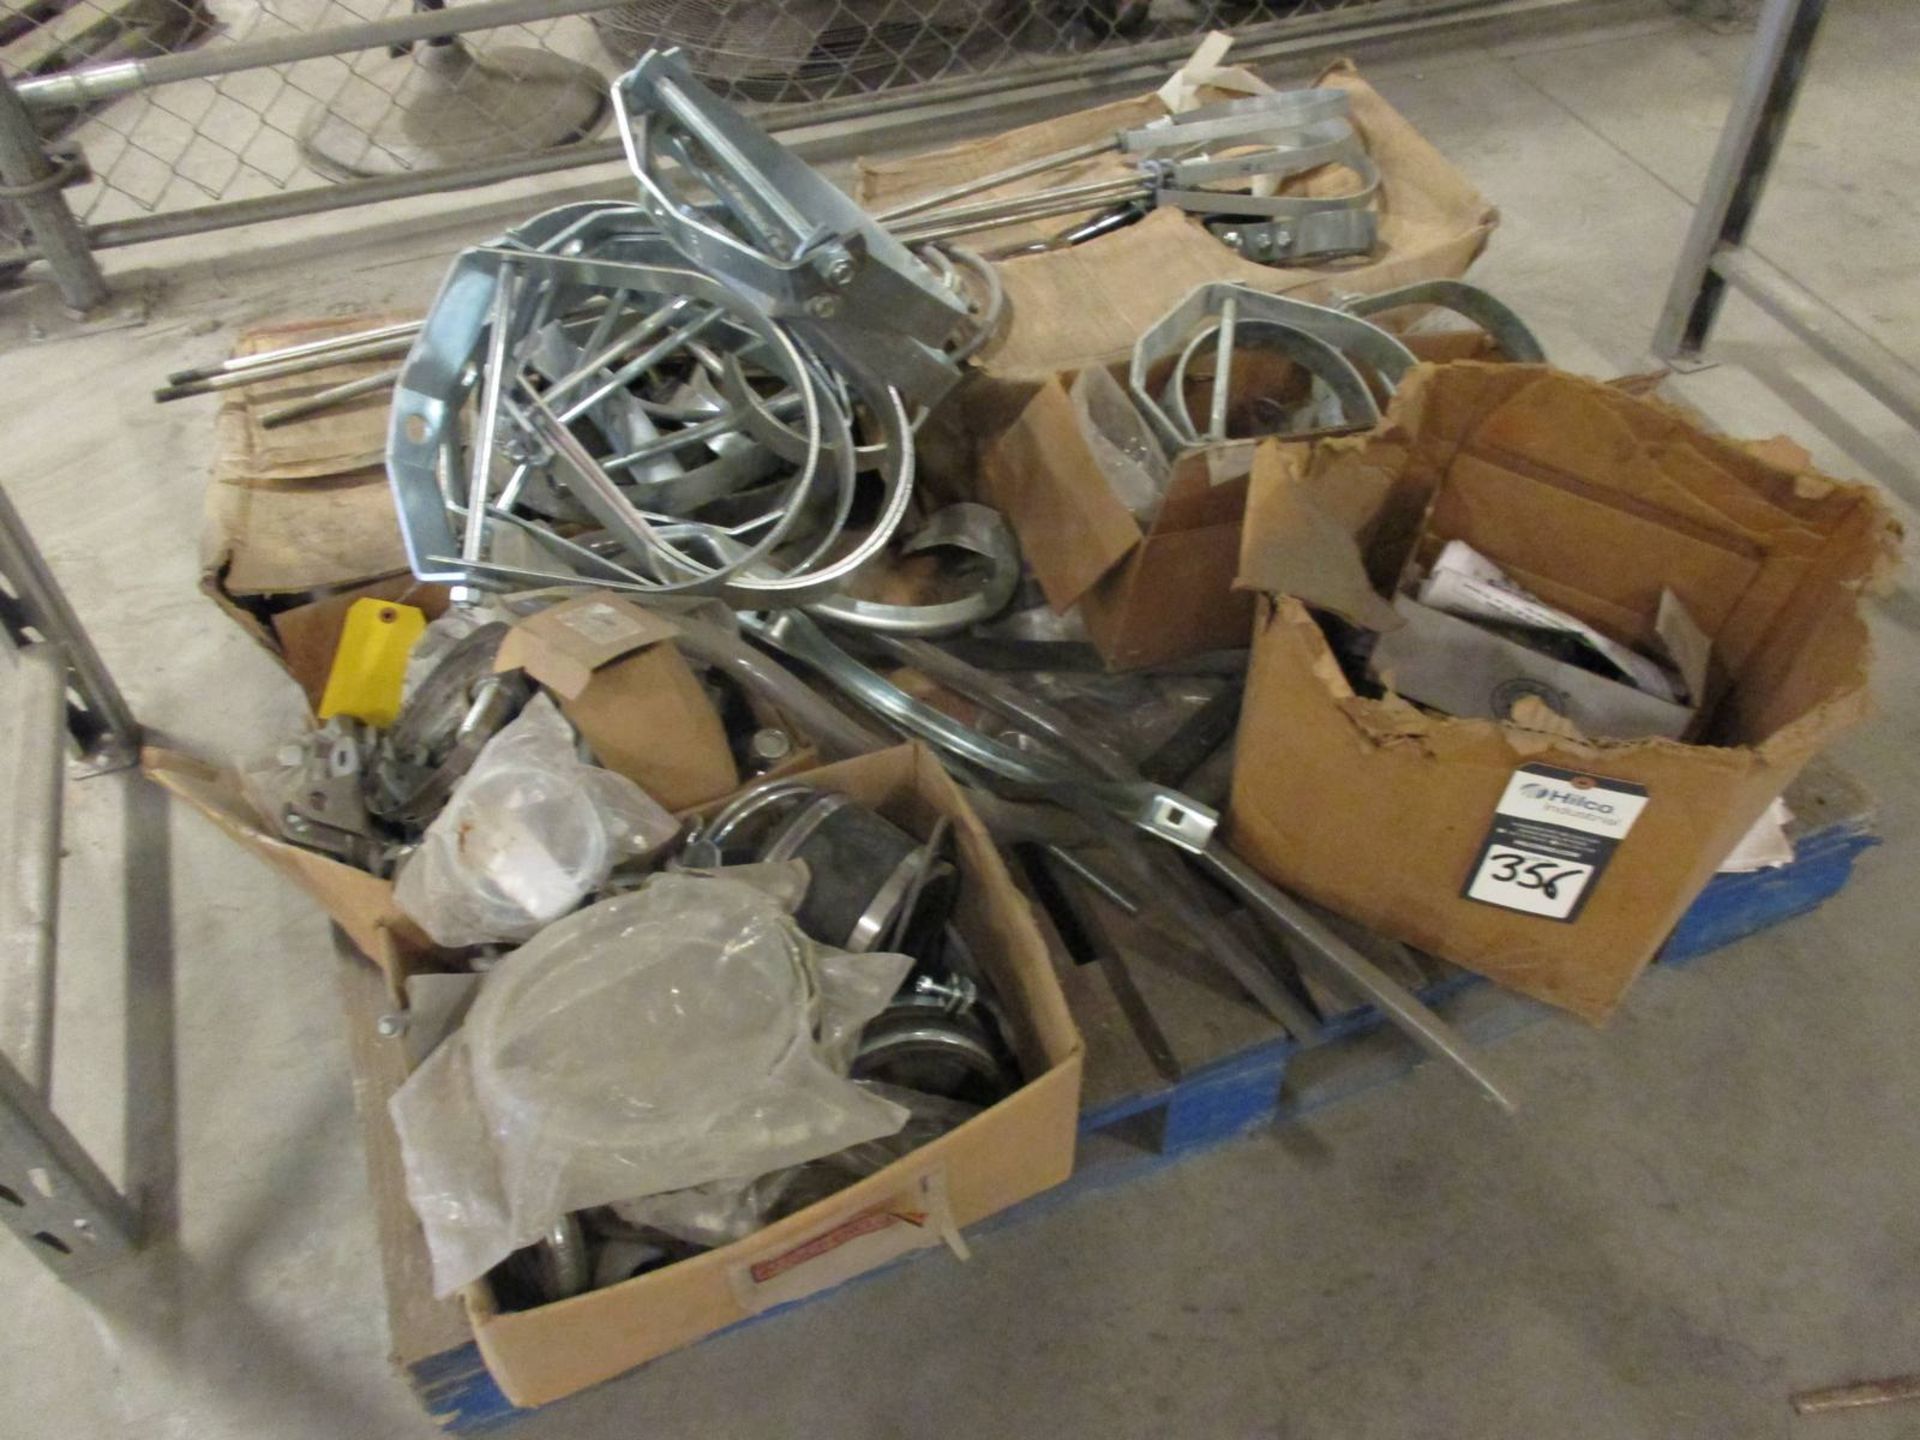 Contents of Tool Crib - Image 5 of 6